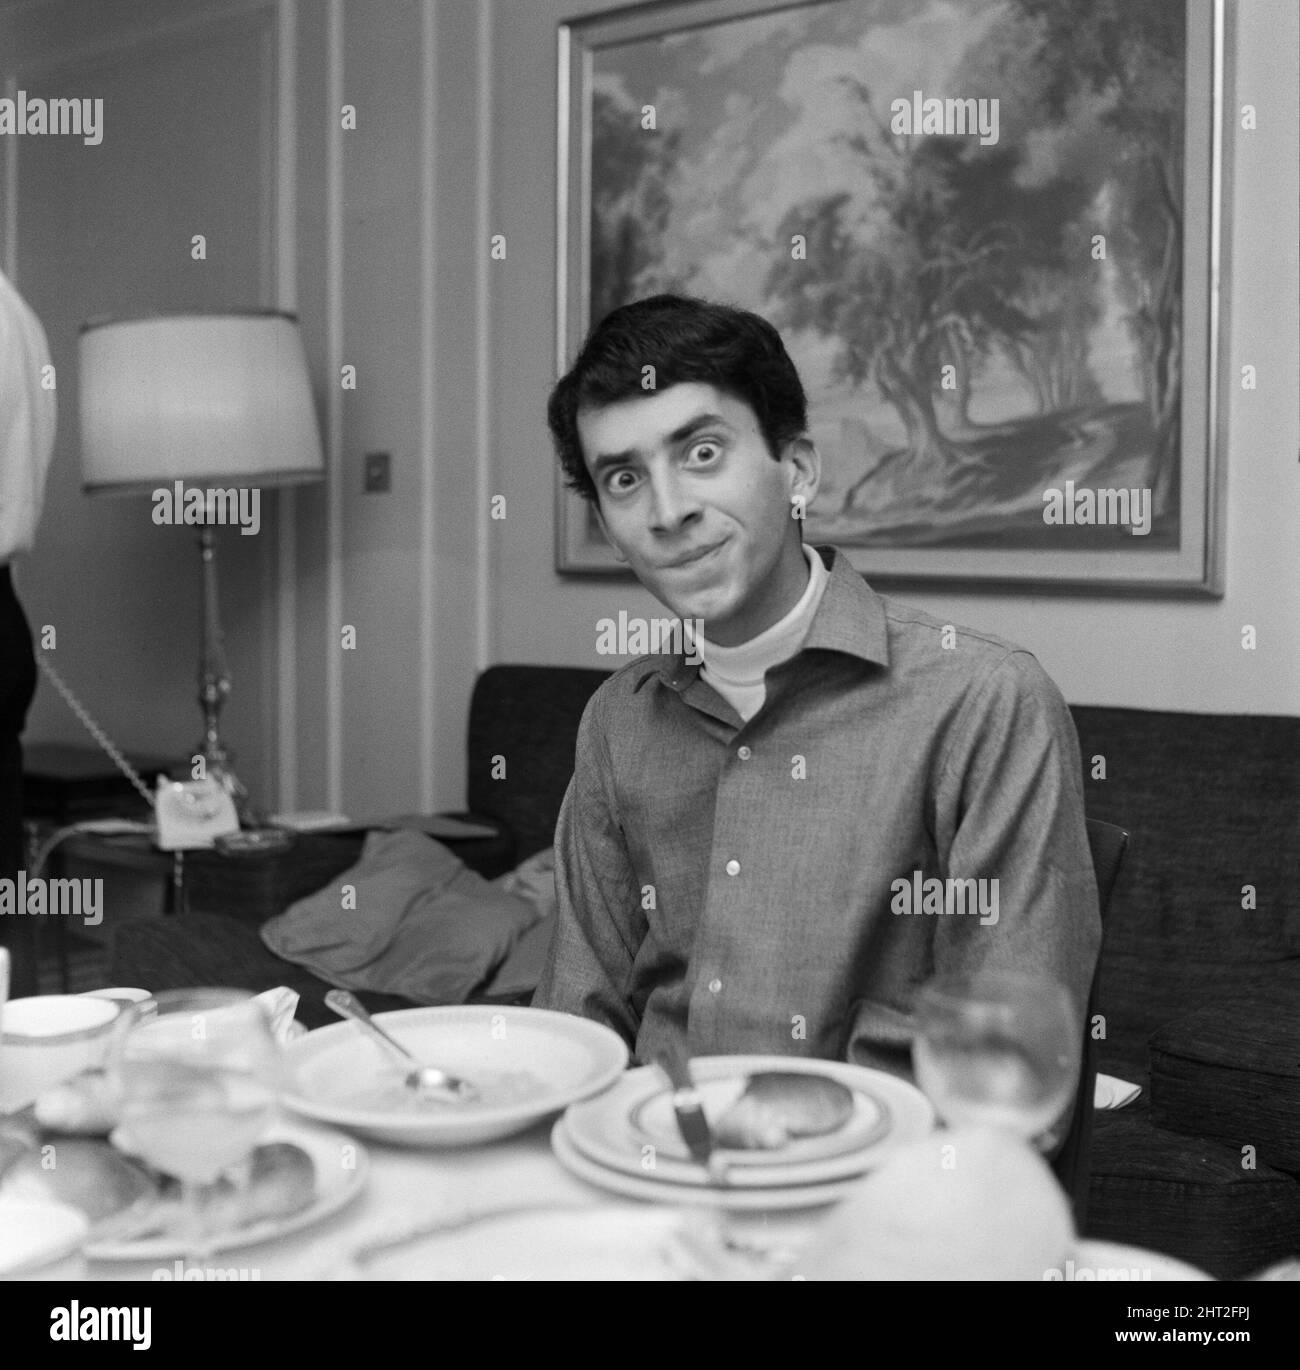 Gary Lewis, son of American film comedian Jerry Lewis pictured at breakfast in his London hotel before leaving for Amsterdam. Gary is the front man for Gary Lewis and The Playboys.  Gary Lewis and The Playboys were an American 1960s era pop and rock group. They are best known for their 1965 Billboard Hot 100 number-one single 'This Diamond Ring', which was the first of a string of hit singles they had in 1965 and 1966. The band had an earnest, boy-next-door image similar to British invasion contemporaries such as Herman's Hermits and Gerry and the Pacemakers.   Picture taken 24th September 196 Stock Photo